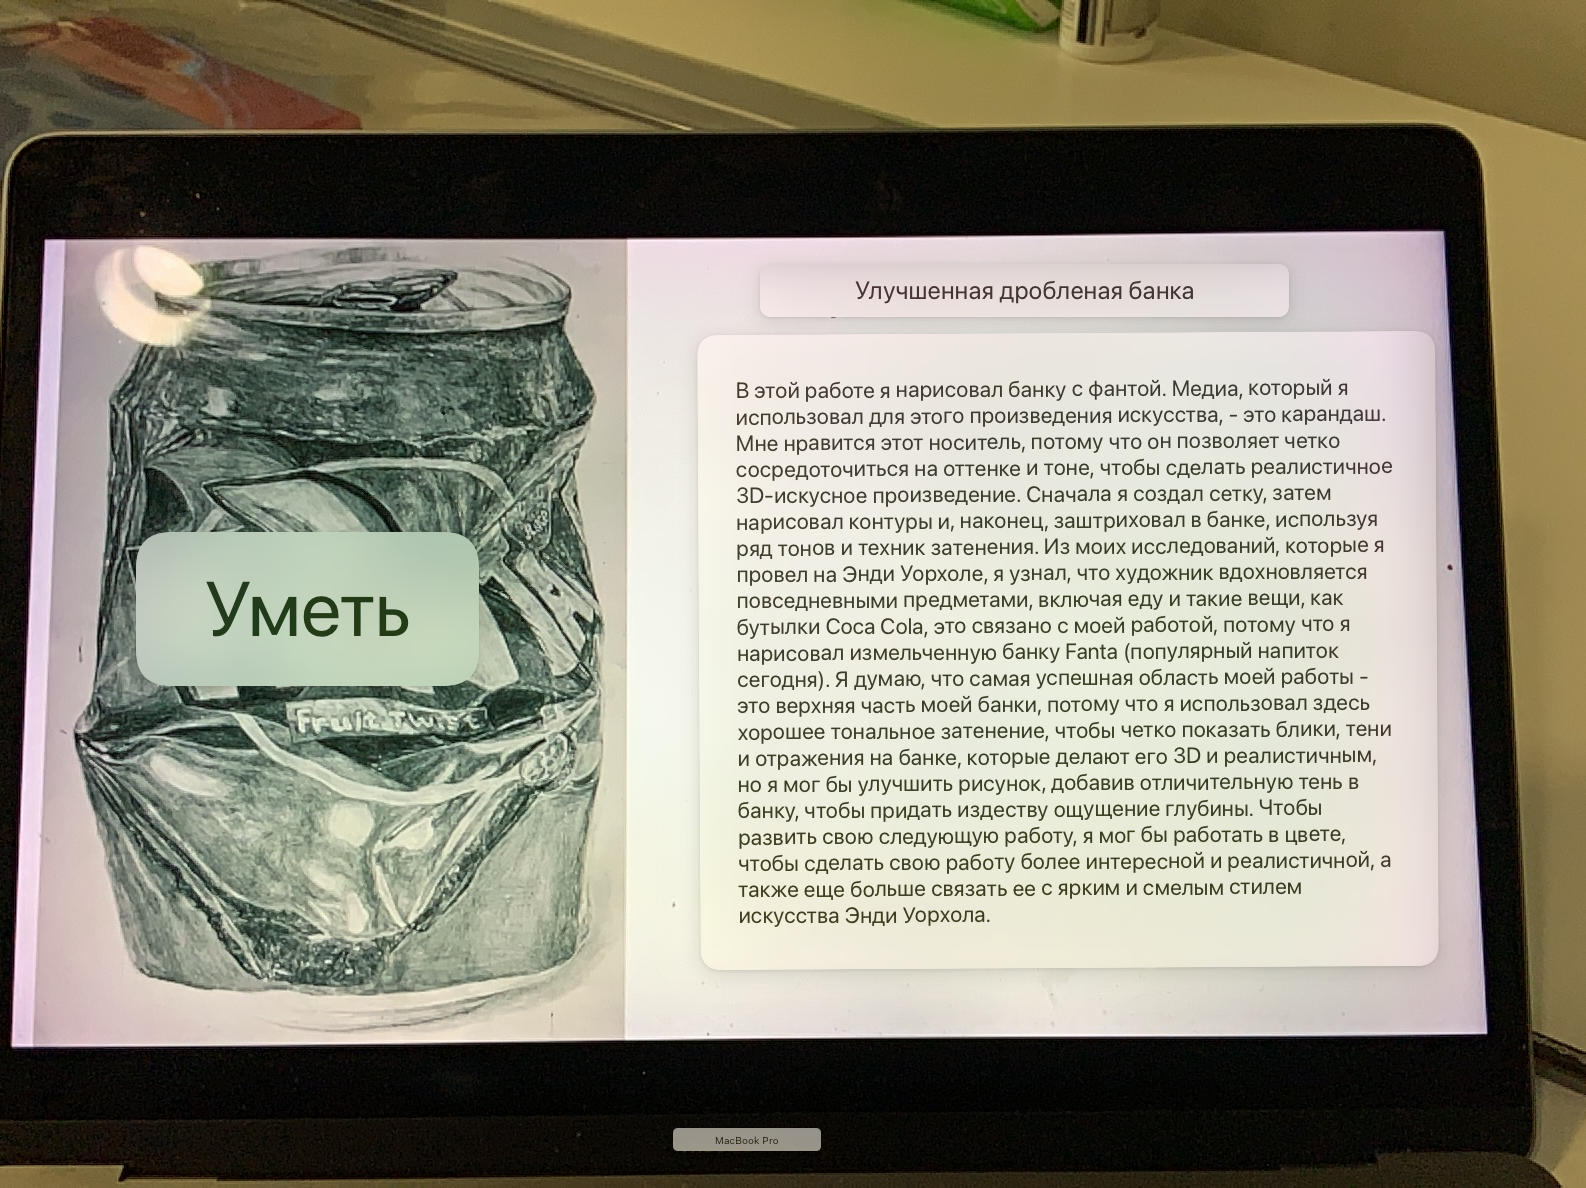 An example of pupils work, a drawing of a crushed drinks can and written work evaluating the drawing translated into Russian